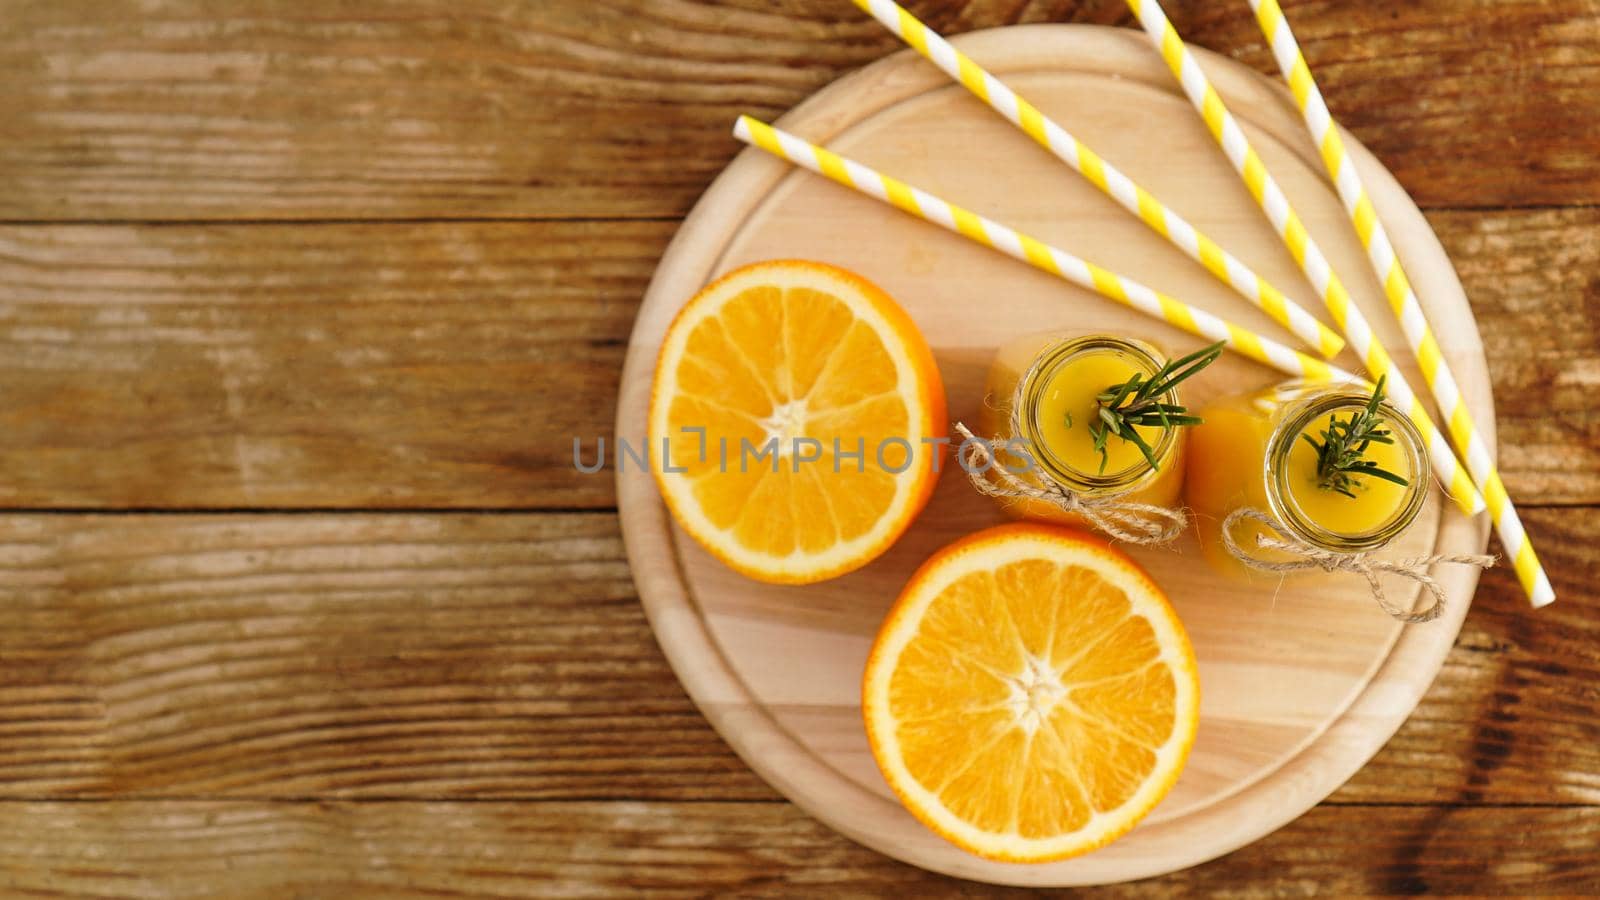 Orange juice in glass bottles. The juice is decorated with a sprig of rosemary. Juice on wooden background. Top view